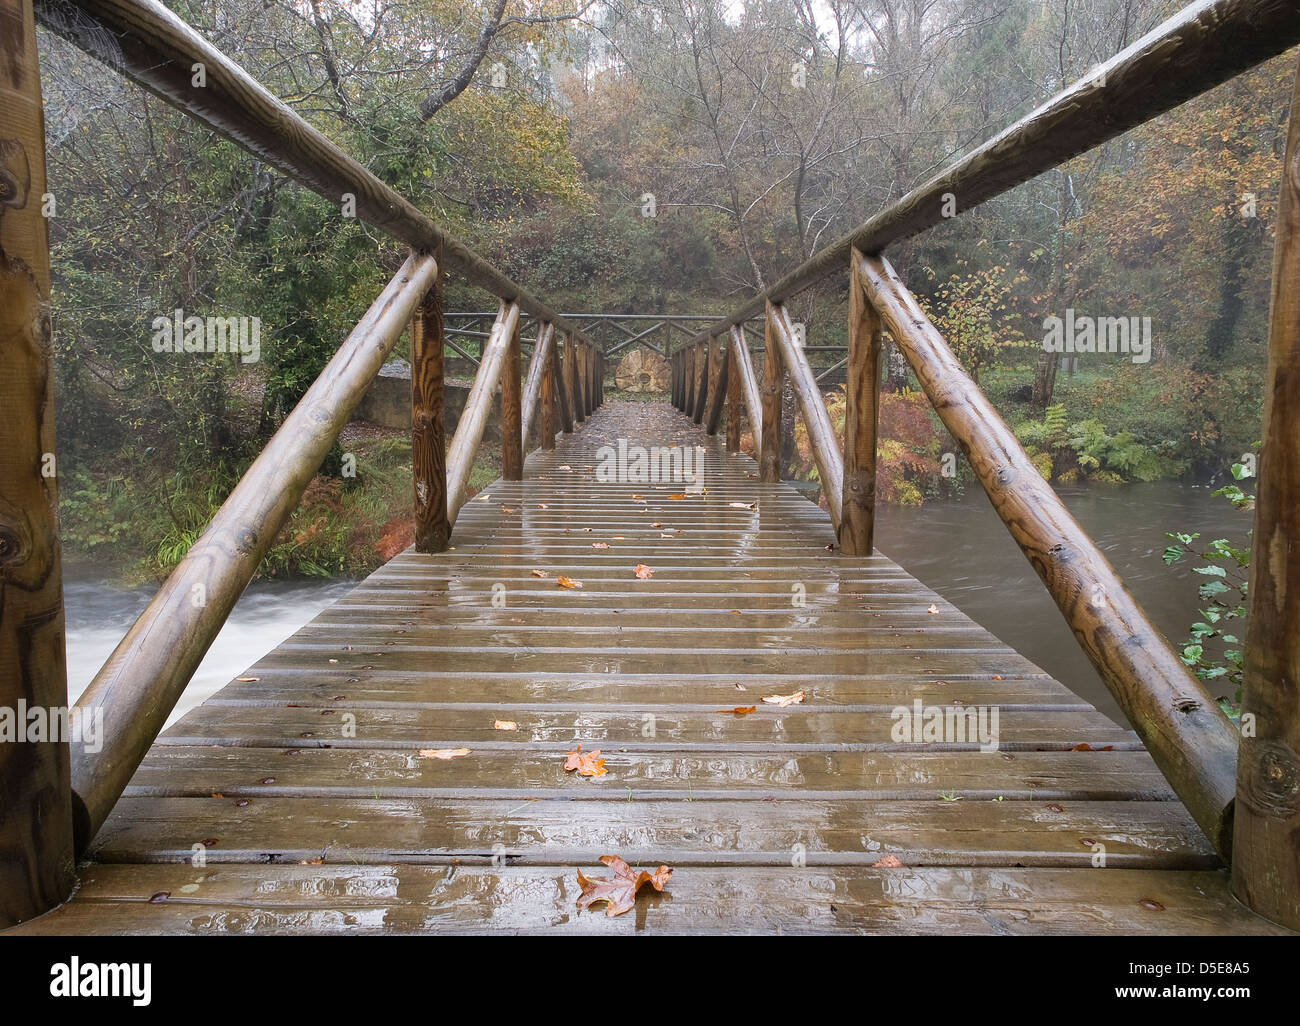 Bridge in the forest on a rainy day Stock Photo